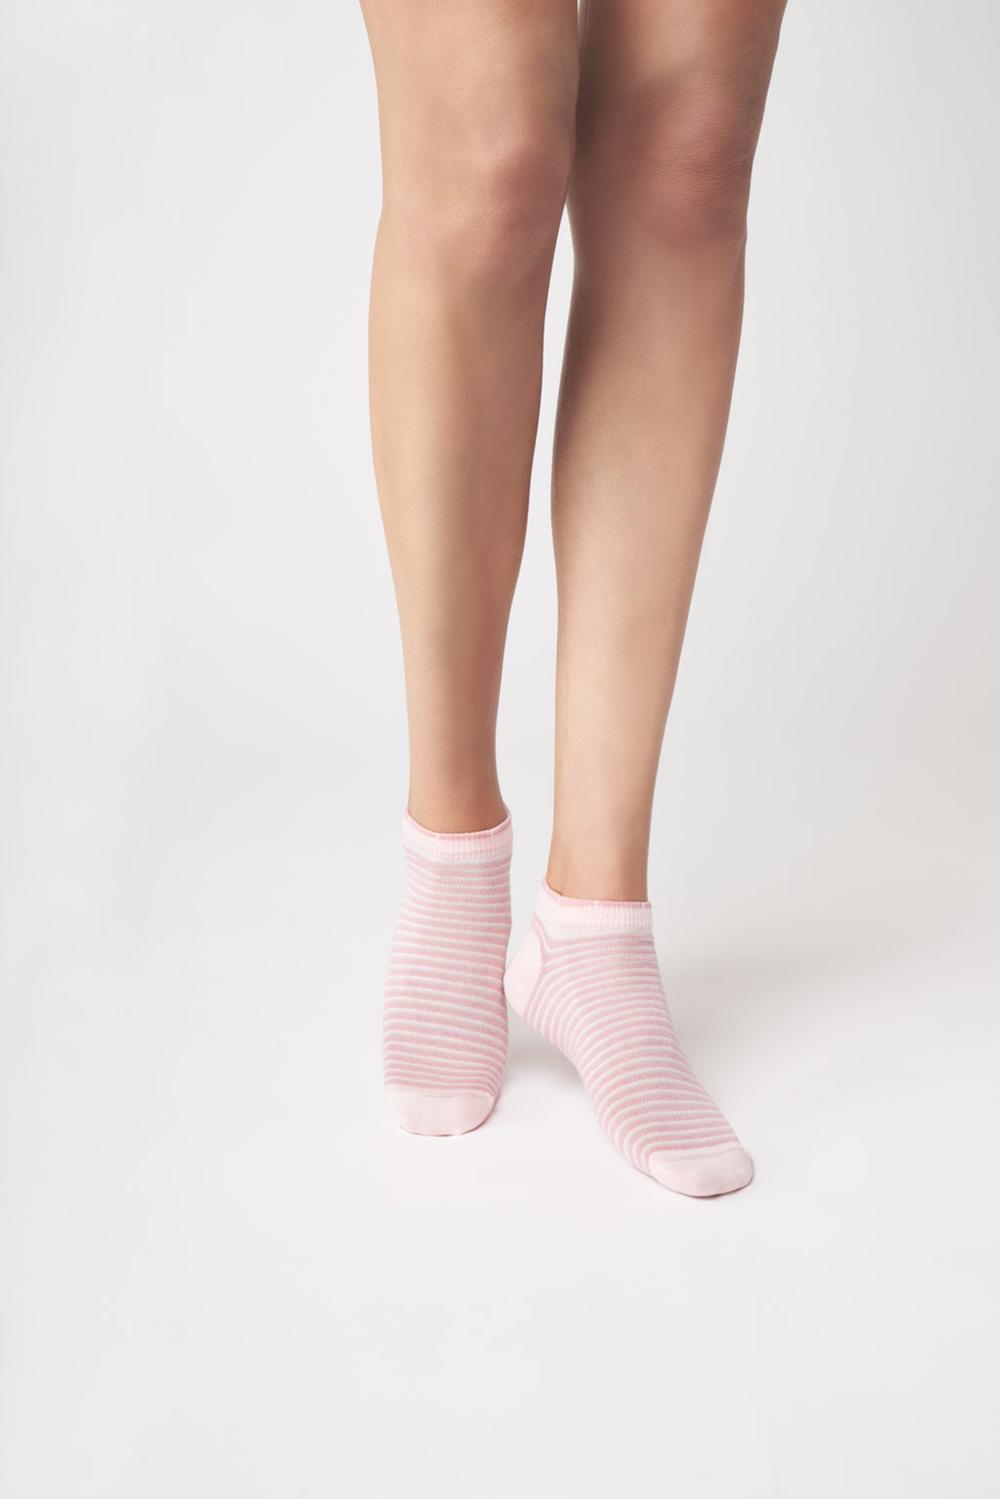 SiSi Righe MiniCalzino - Light pale pink low ankle cotton mix fashion socks with a stripe pattern in black with gold lurex, shaped heel and flat toe seam.